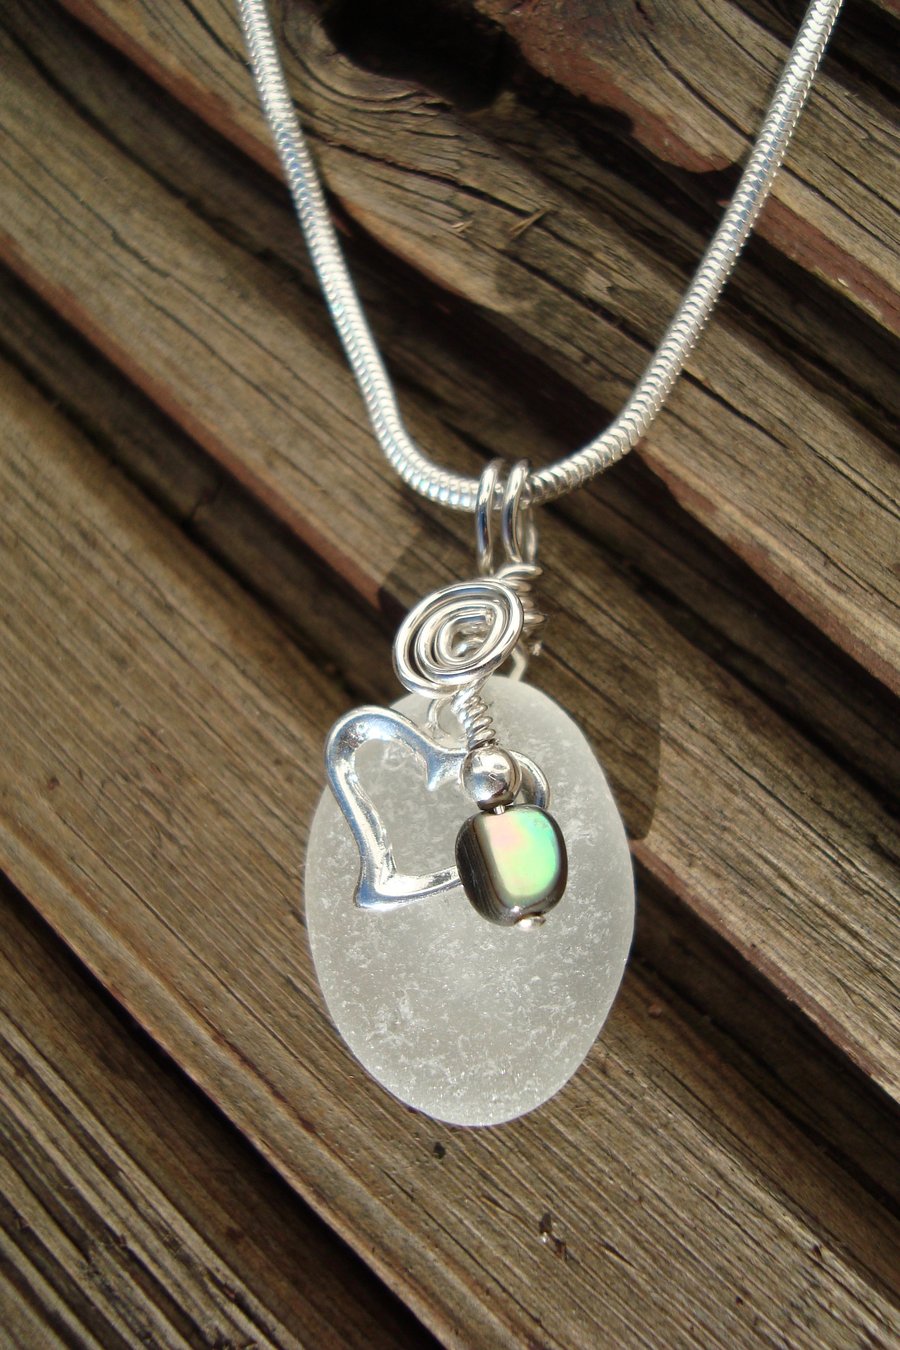 Genuine Sea Glass Pendant and Sterling Silver Heart